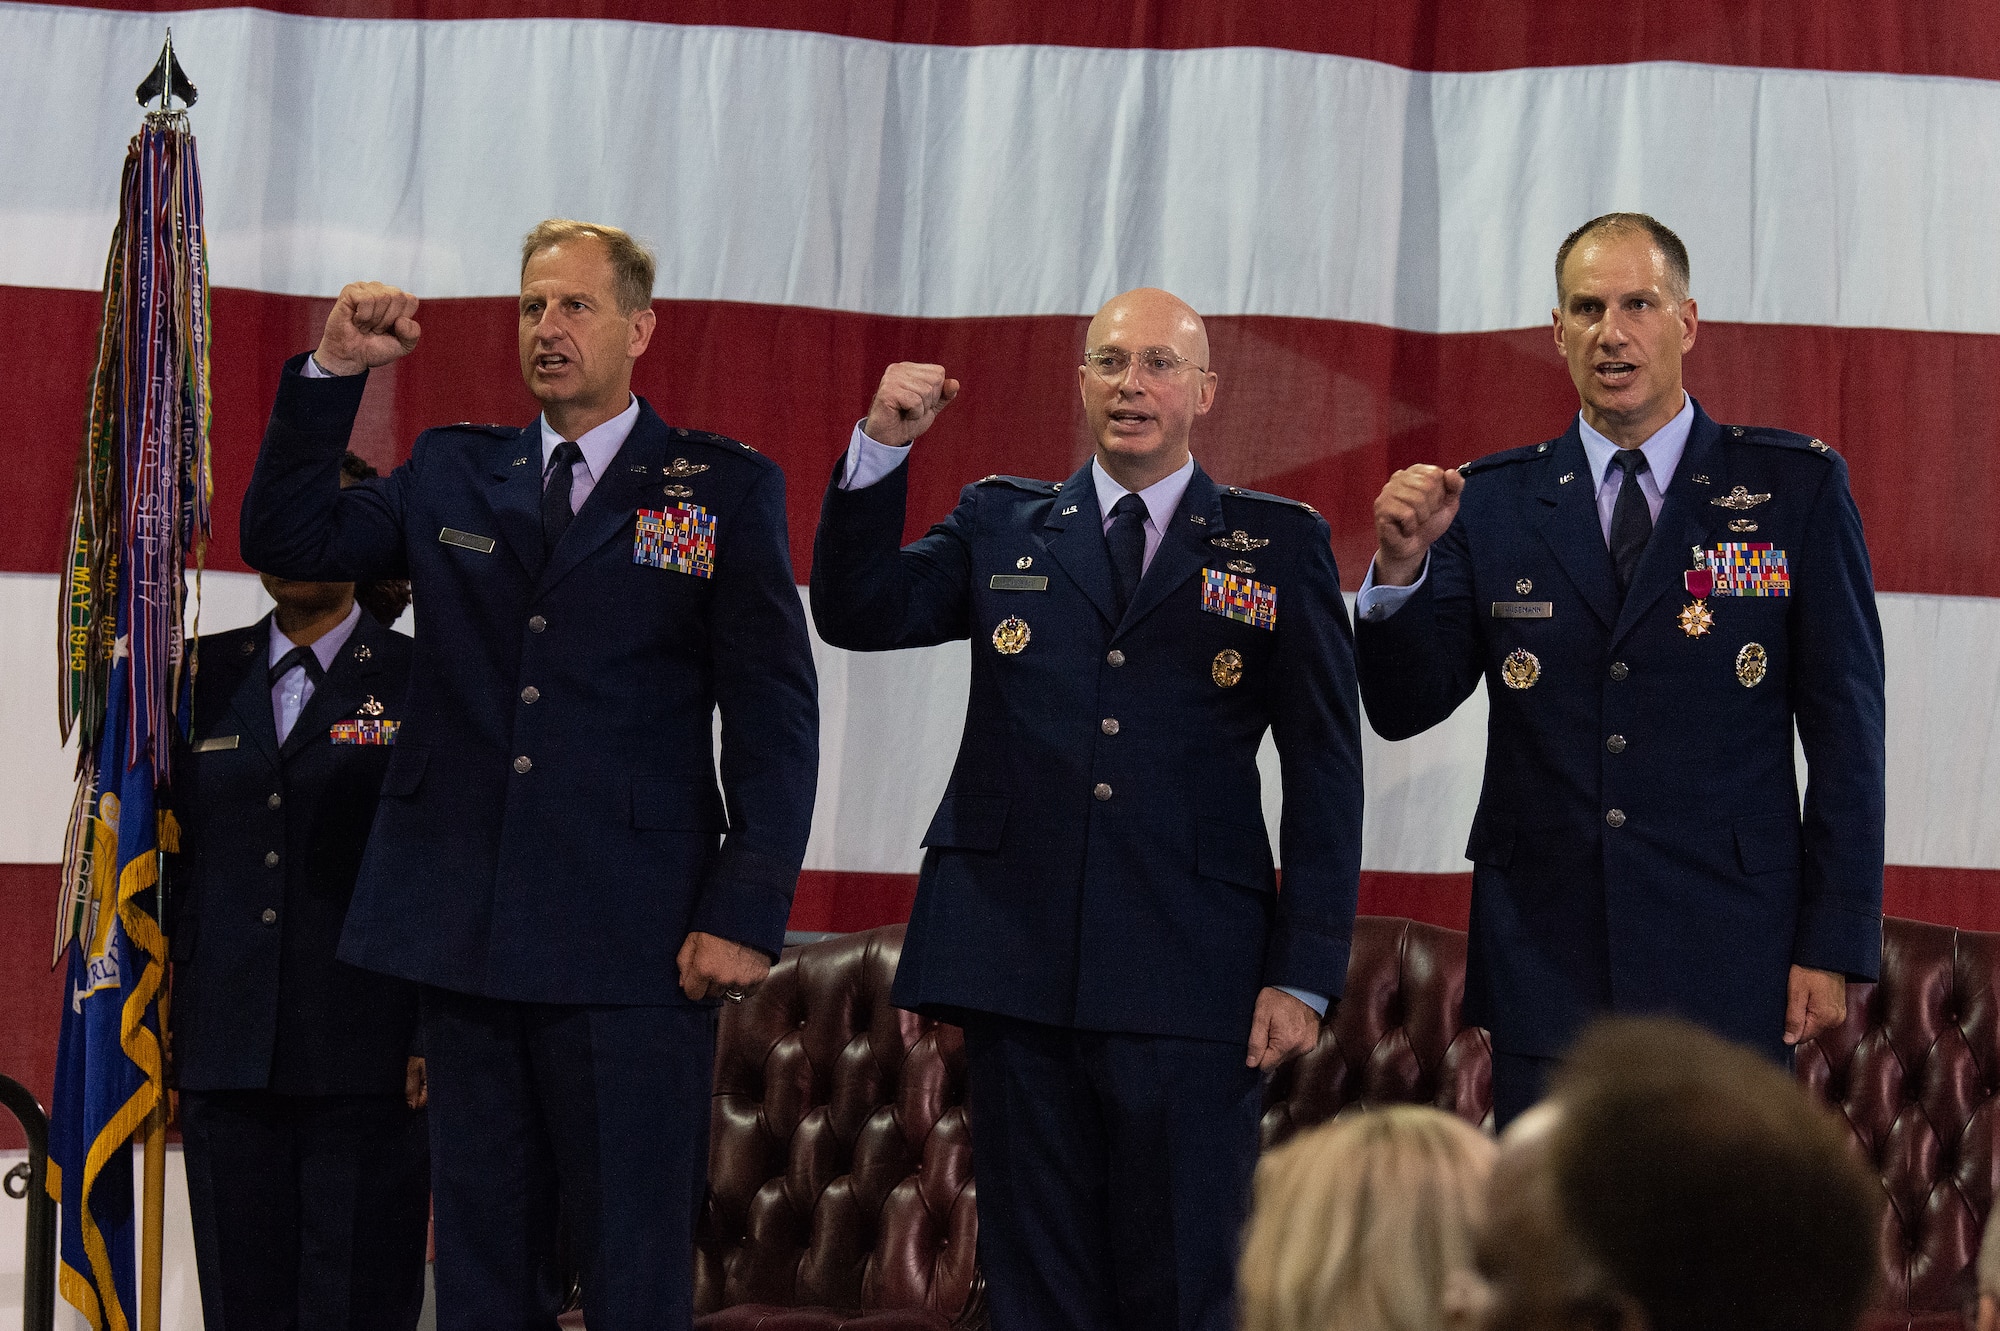 From left, Maj. Gen. Corey J. Martin, 18th Air Force commander, Col. William C. McDonald, 436th Airlift Wing commander, and Col. Matthew S. Husemann, outgoing 436th AW commander, sing the Air Force song during the 436th AW Change of Command ceremony at Dover Air Force Base, Delaware, July 7, 2023. Husemann relinquished command to McDonald in a ceremony attended by family, friends, distinguished visitors, local civic leaders and members of Team Dover. (U.S. Air Force photo by Roland Balik)